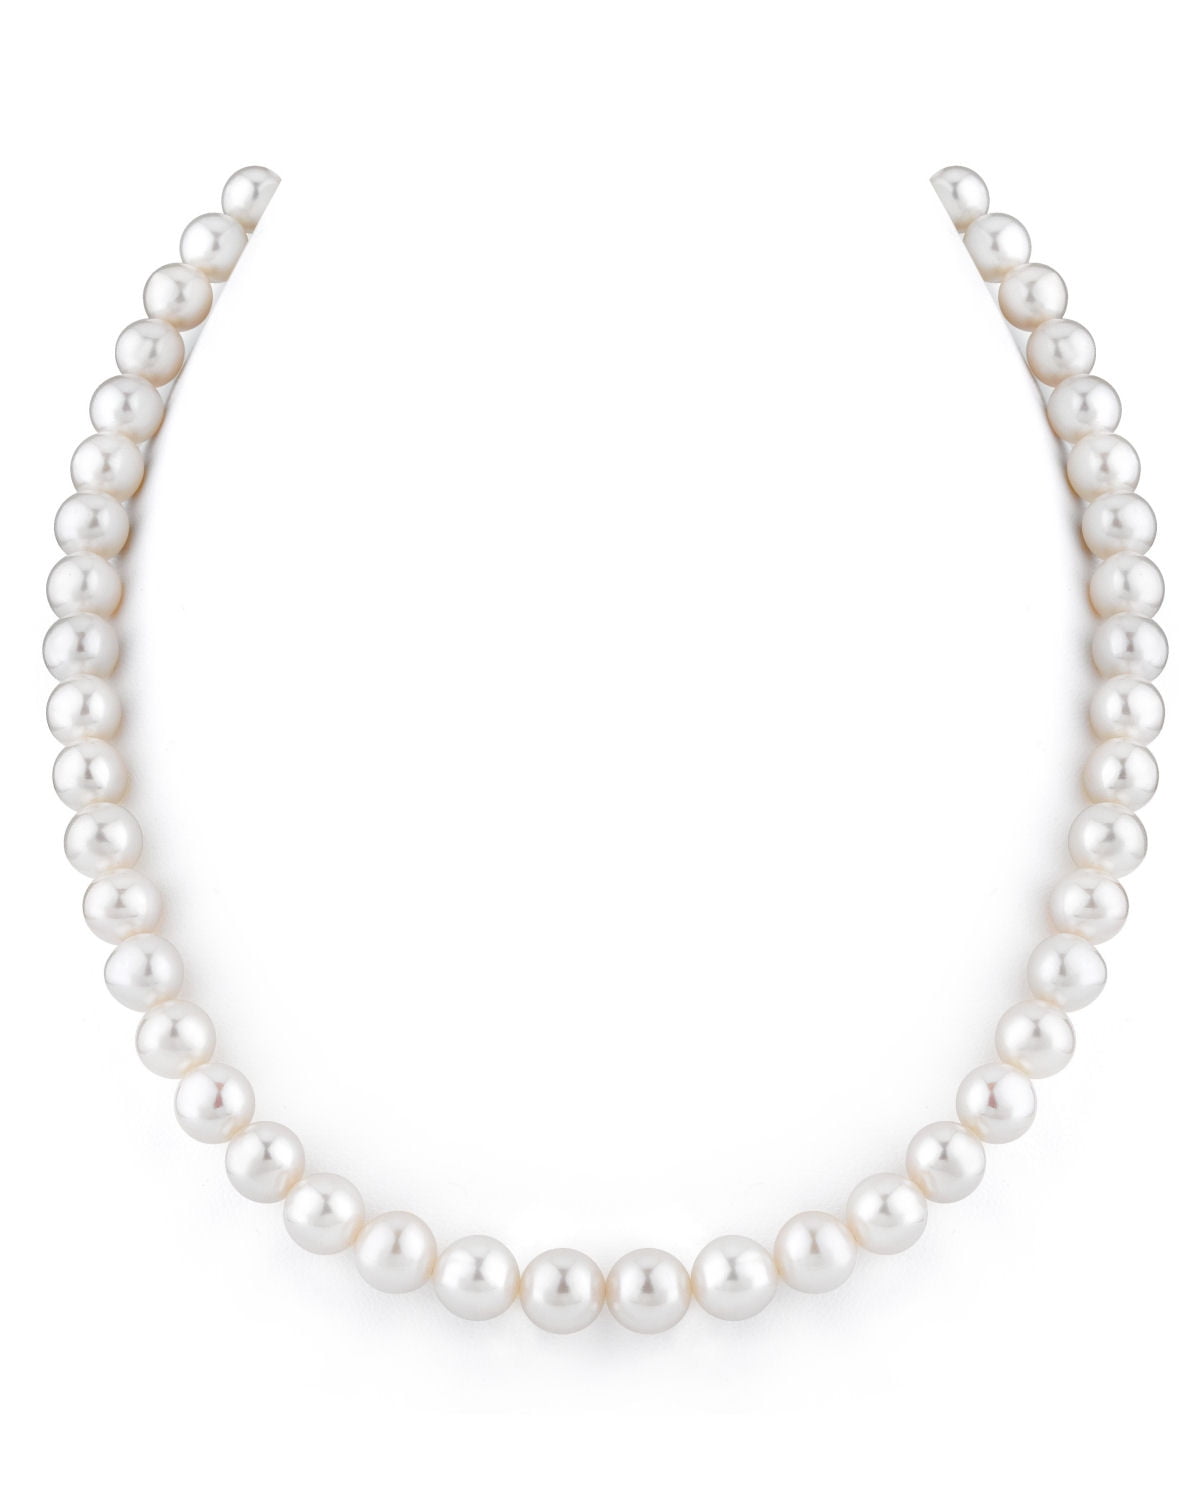 Orien Jewelry 6-9mm White Freshwater Cultured Pearl Necklaces for Women 16-48 Inch AA Quality